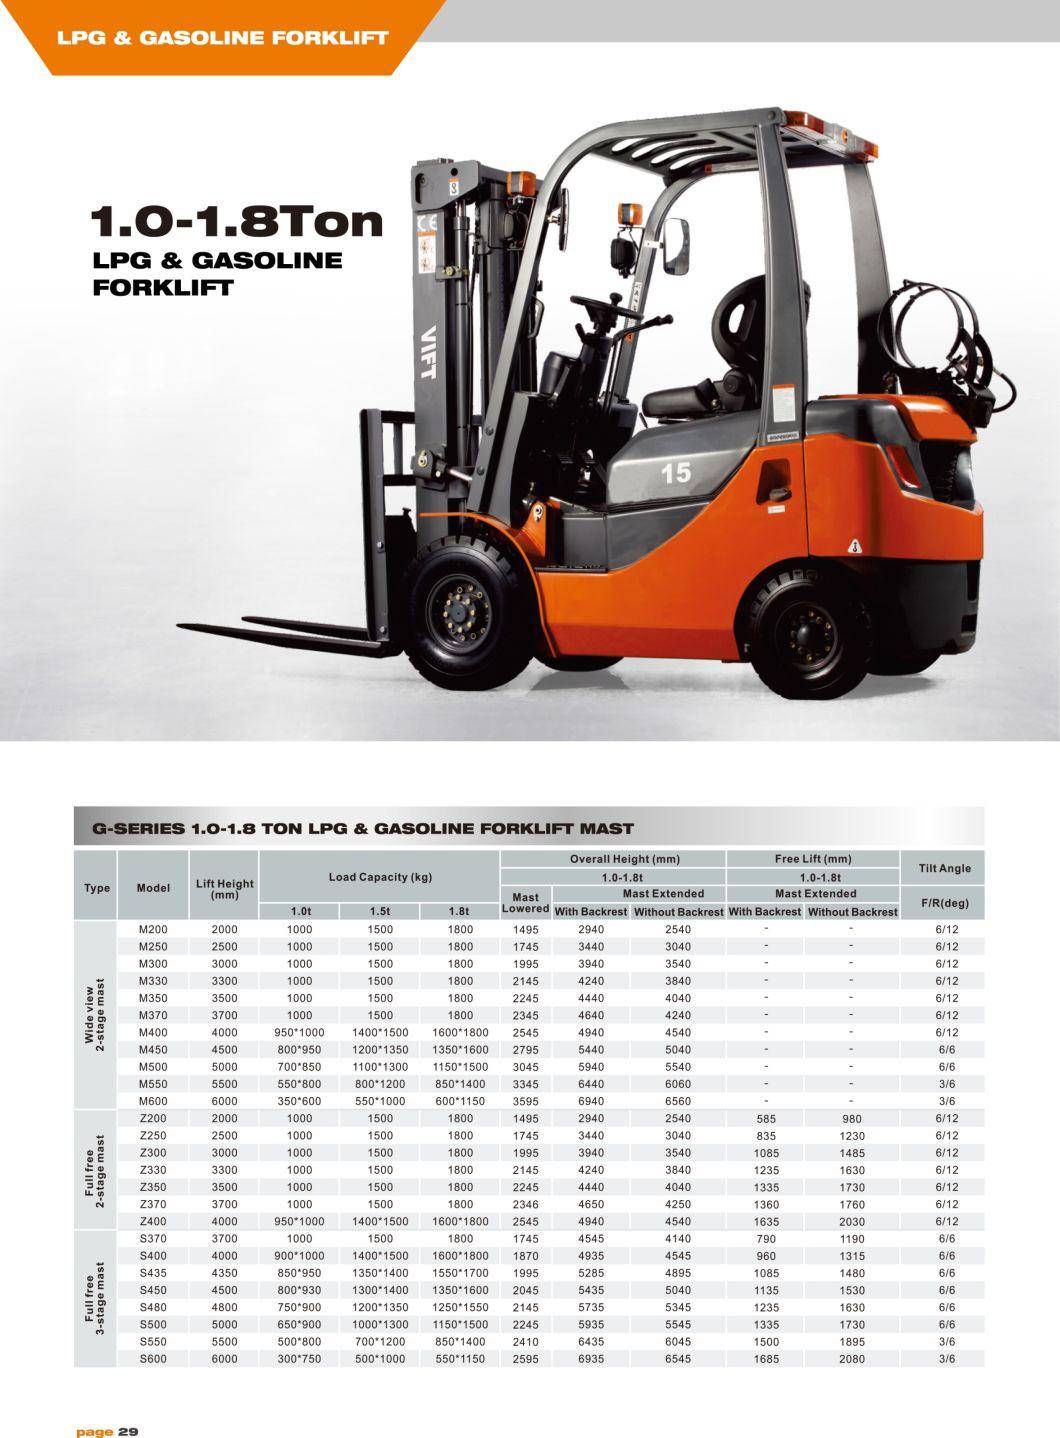 Dual Fuel 1.8t Gas Forklift with Cab